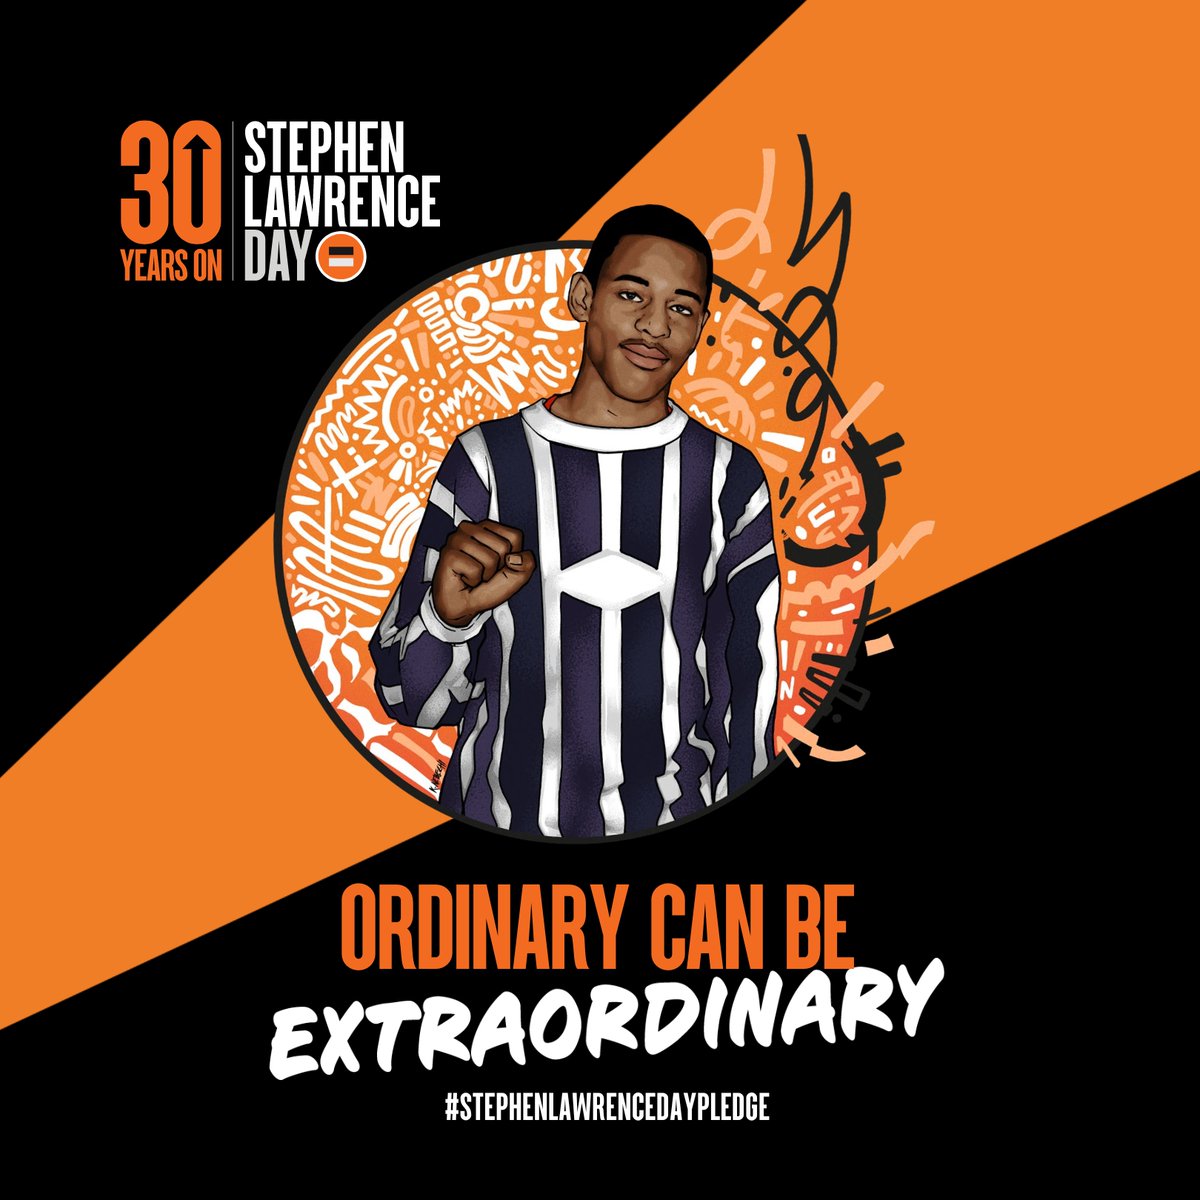 Let's take action on Stephen Lawrence Day that will positively impact the lives of young people from marginalised backgrounds, together we can honour Stephen's life and legacy, and build a kinder, and more equitable society in his name. #StephenLawrenceDay #SLDF30YearsOn